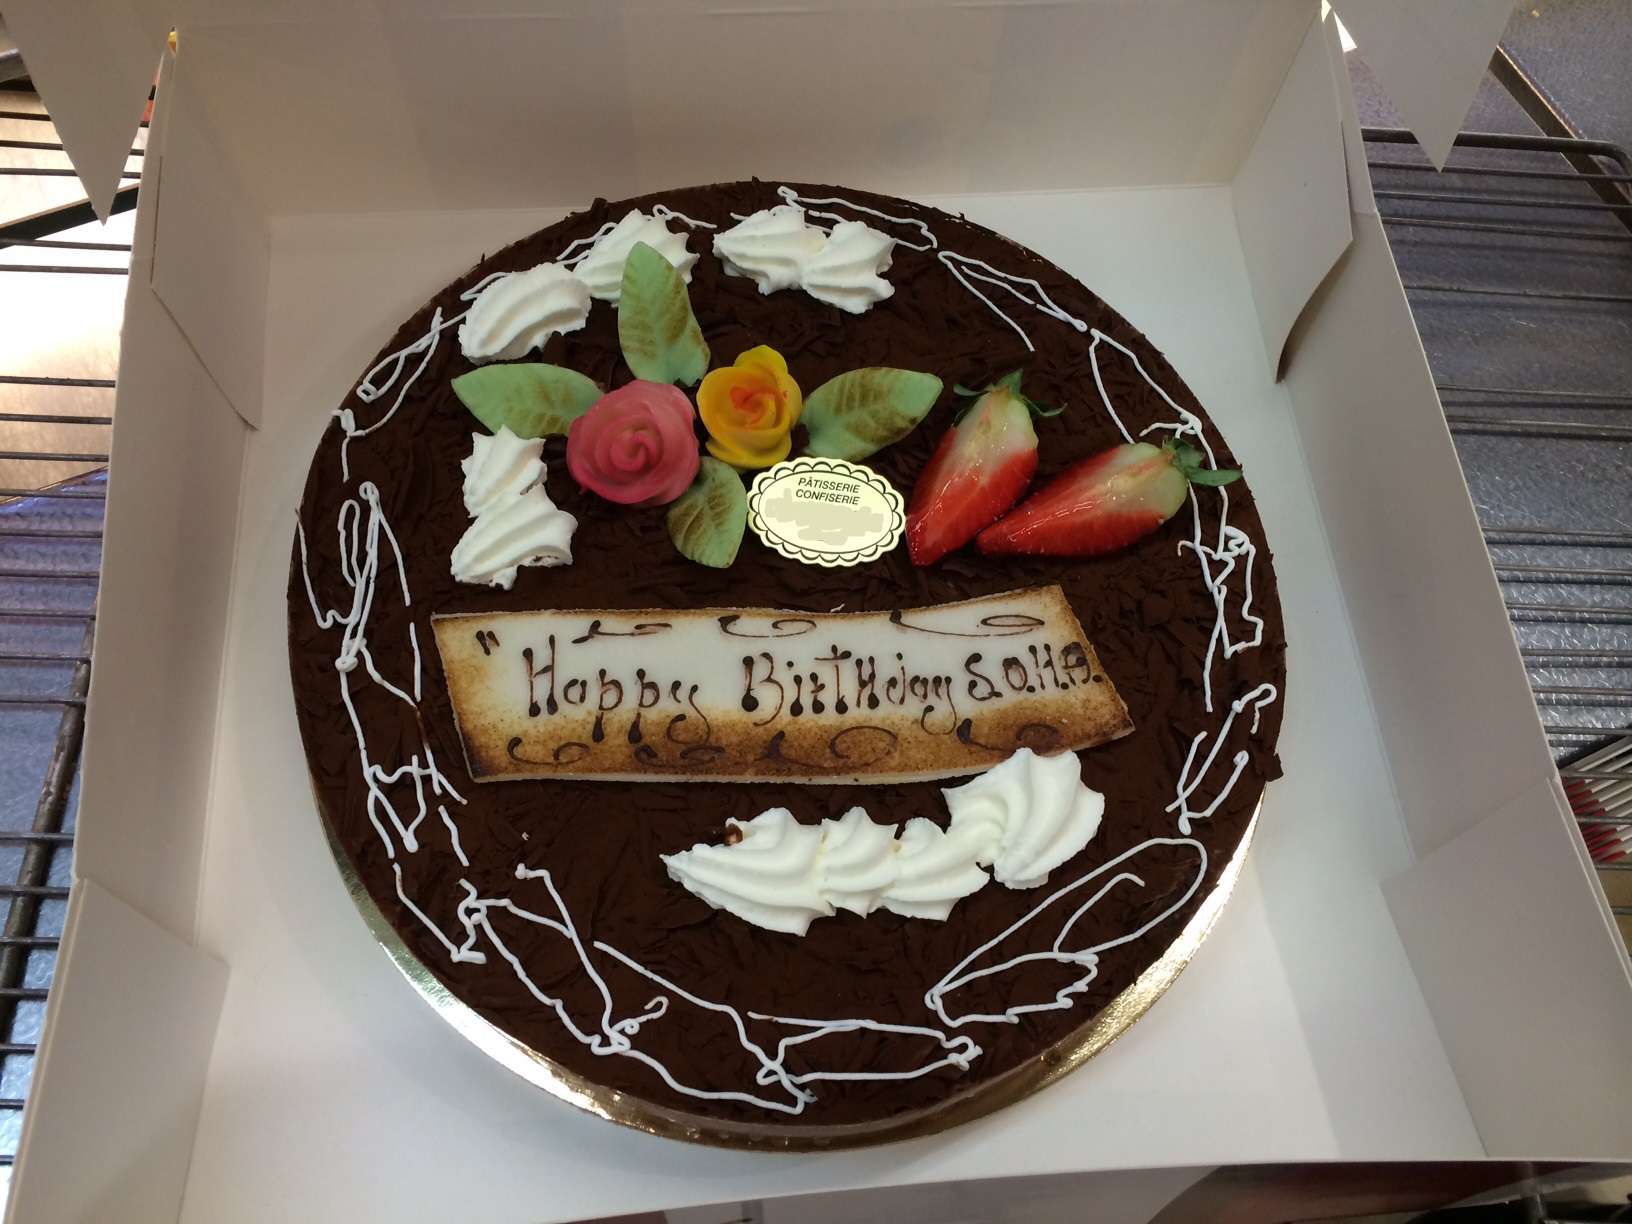 Chocolate birthday Cake (Patisserie) on Request*